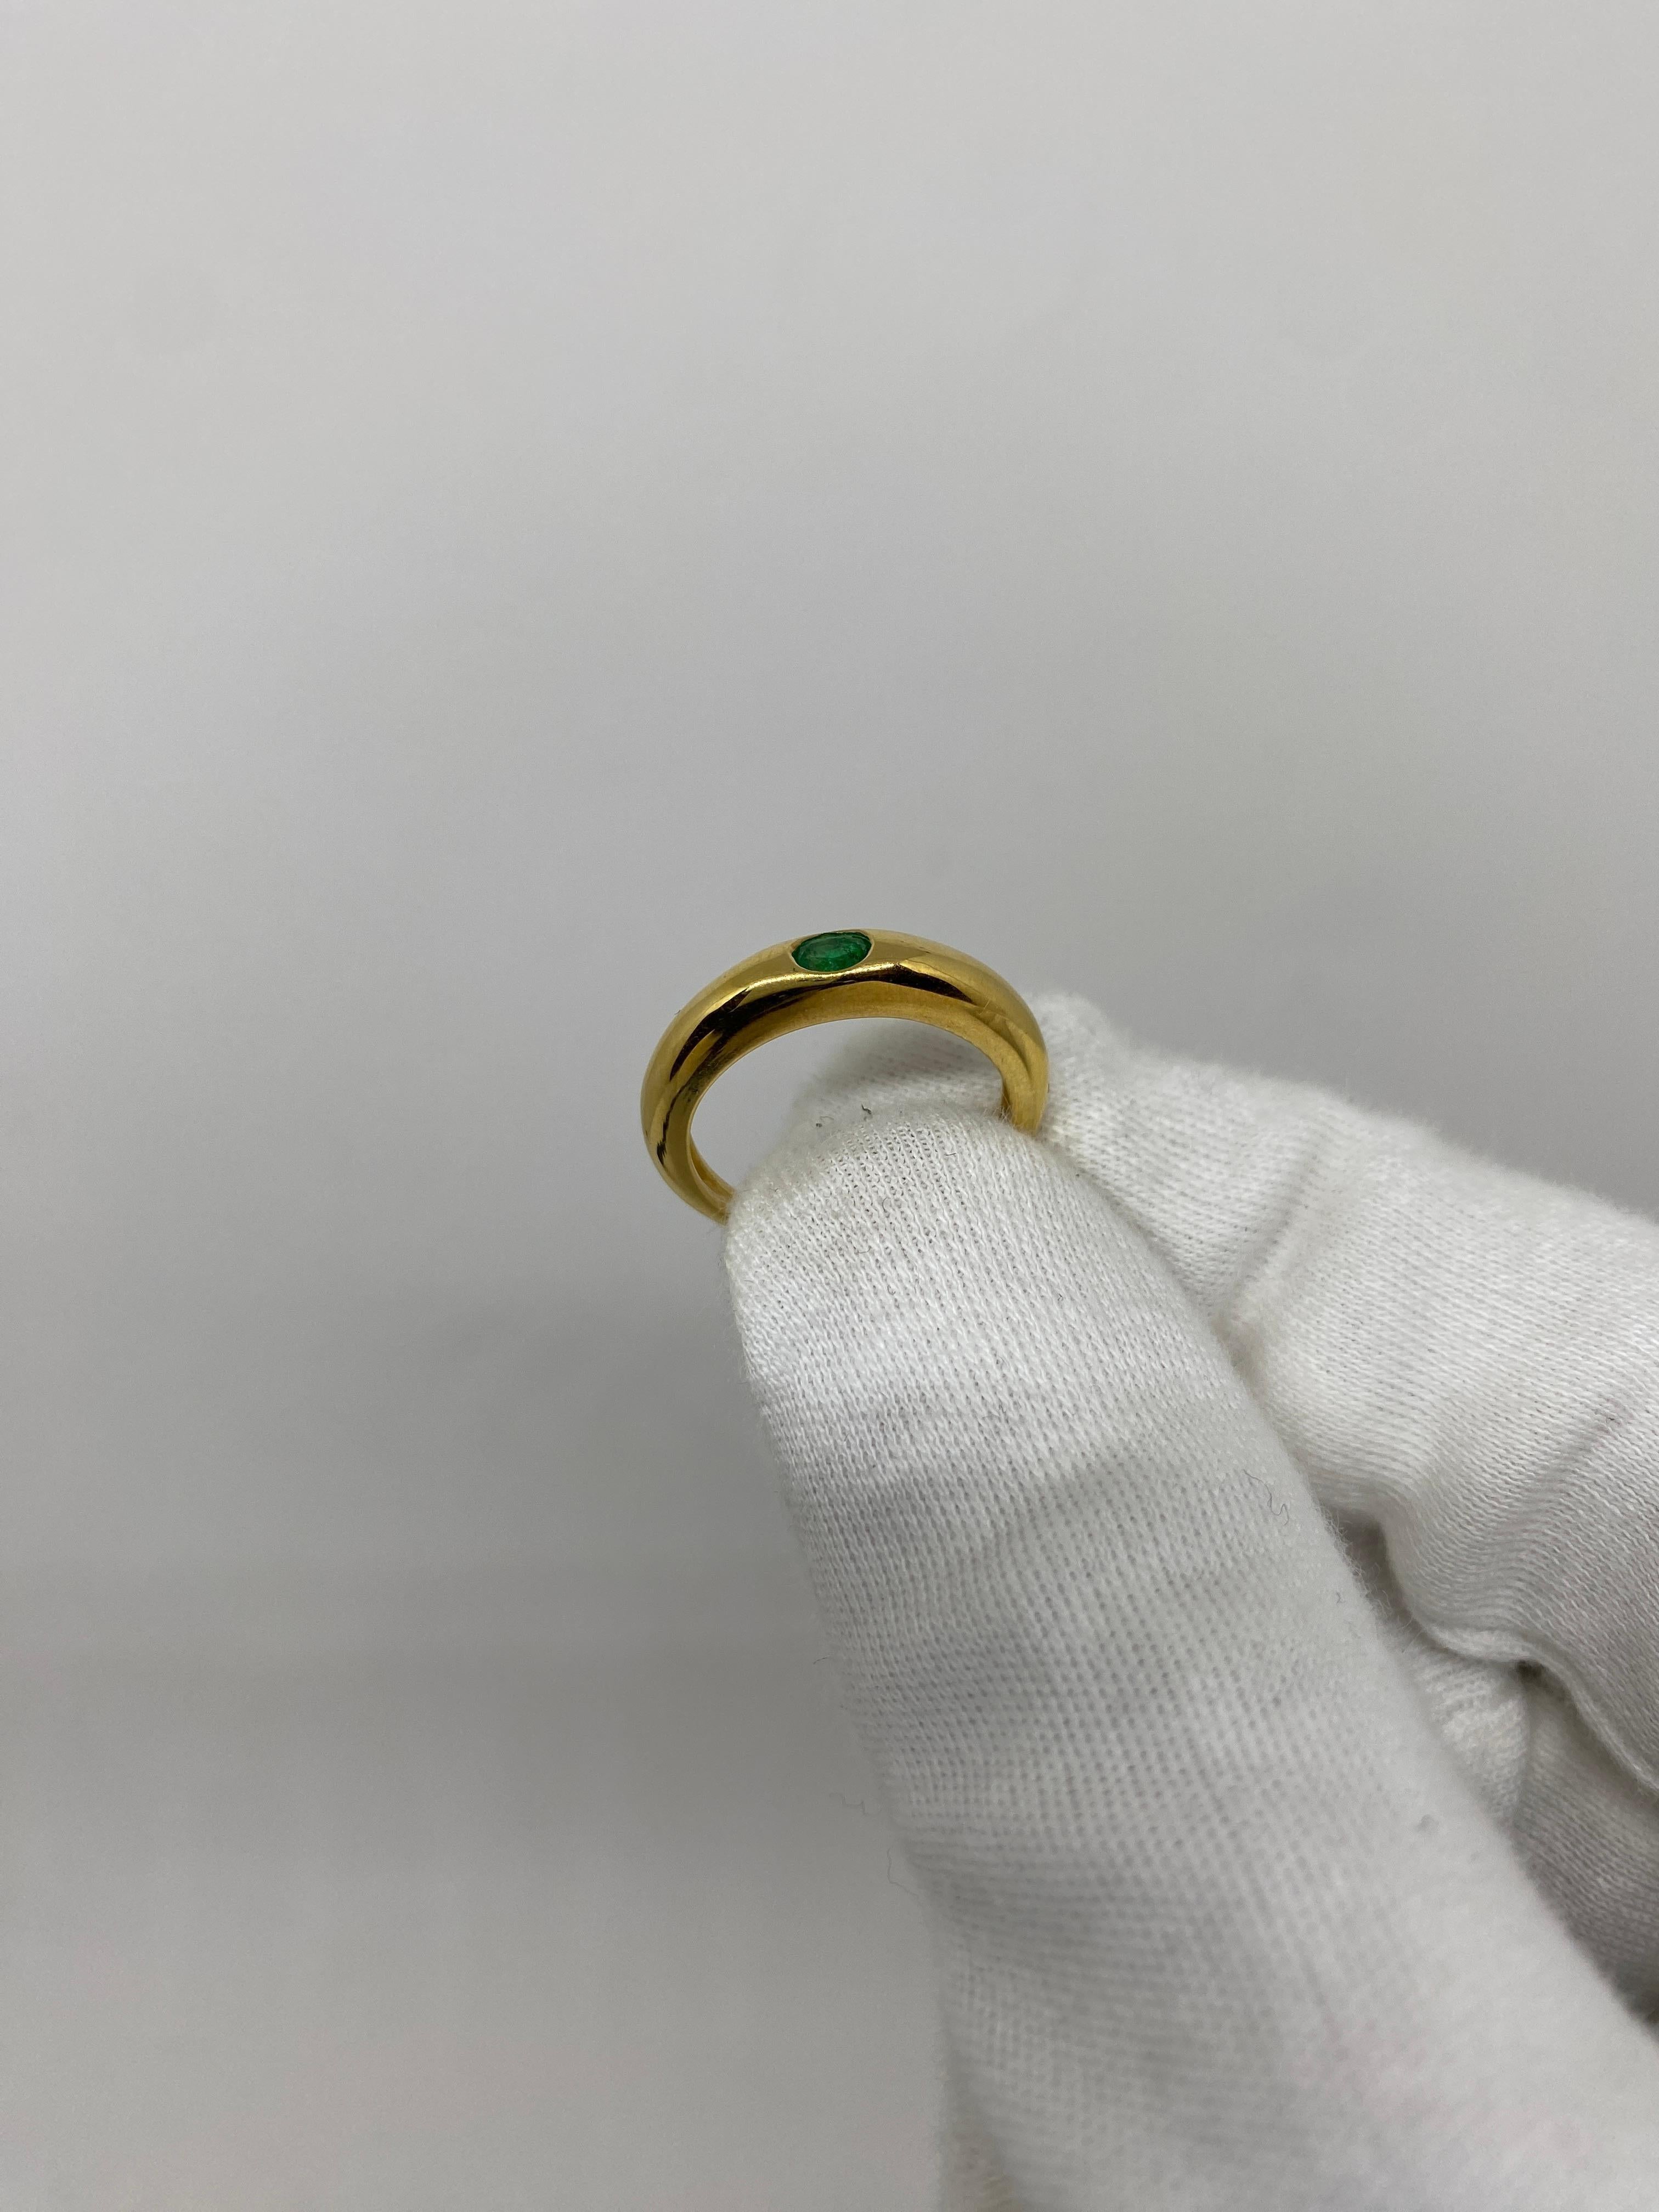 Ring made of 18kt yellow gold with oval-cut natural emerald for ct .0.23

Welcome to our jewelry collection, where every piece tells a story of timeless elegance and unparalleled craftsmanship. As a family-run business in Italy for over 100 years,